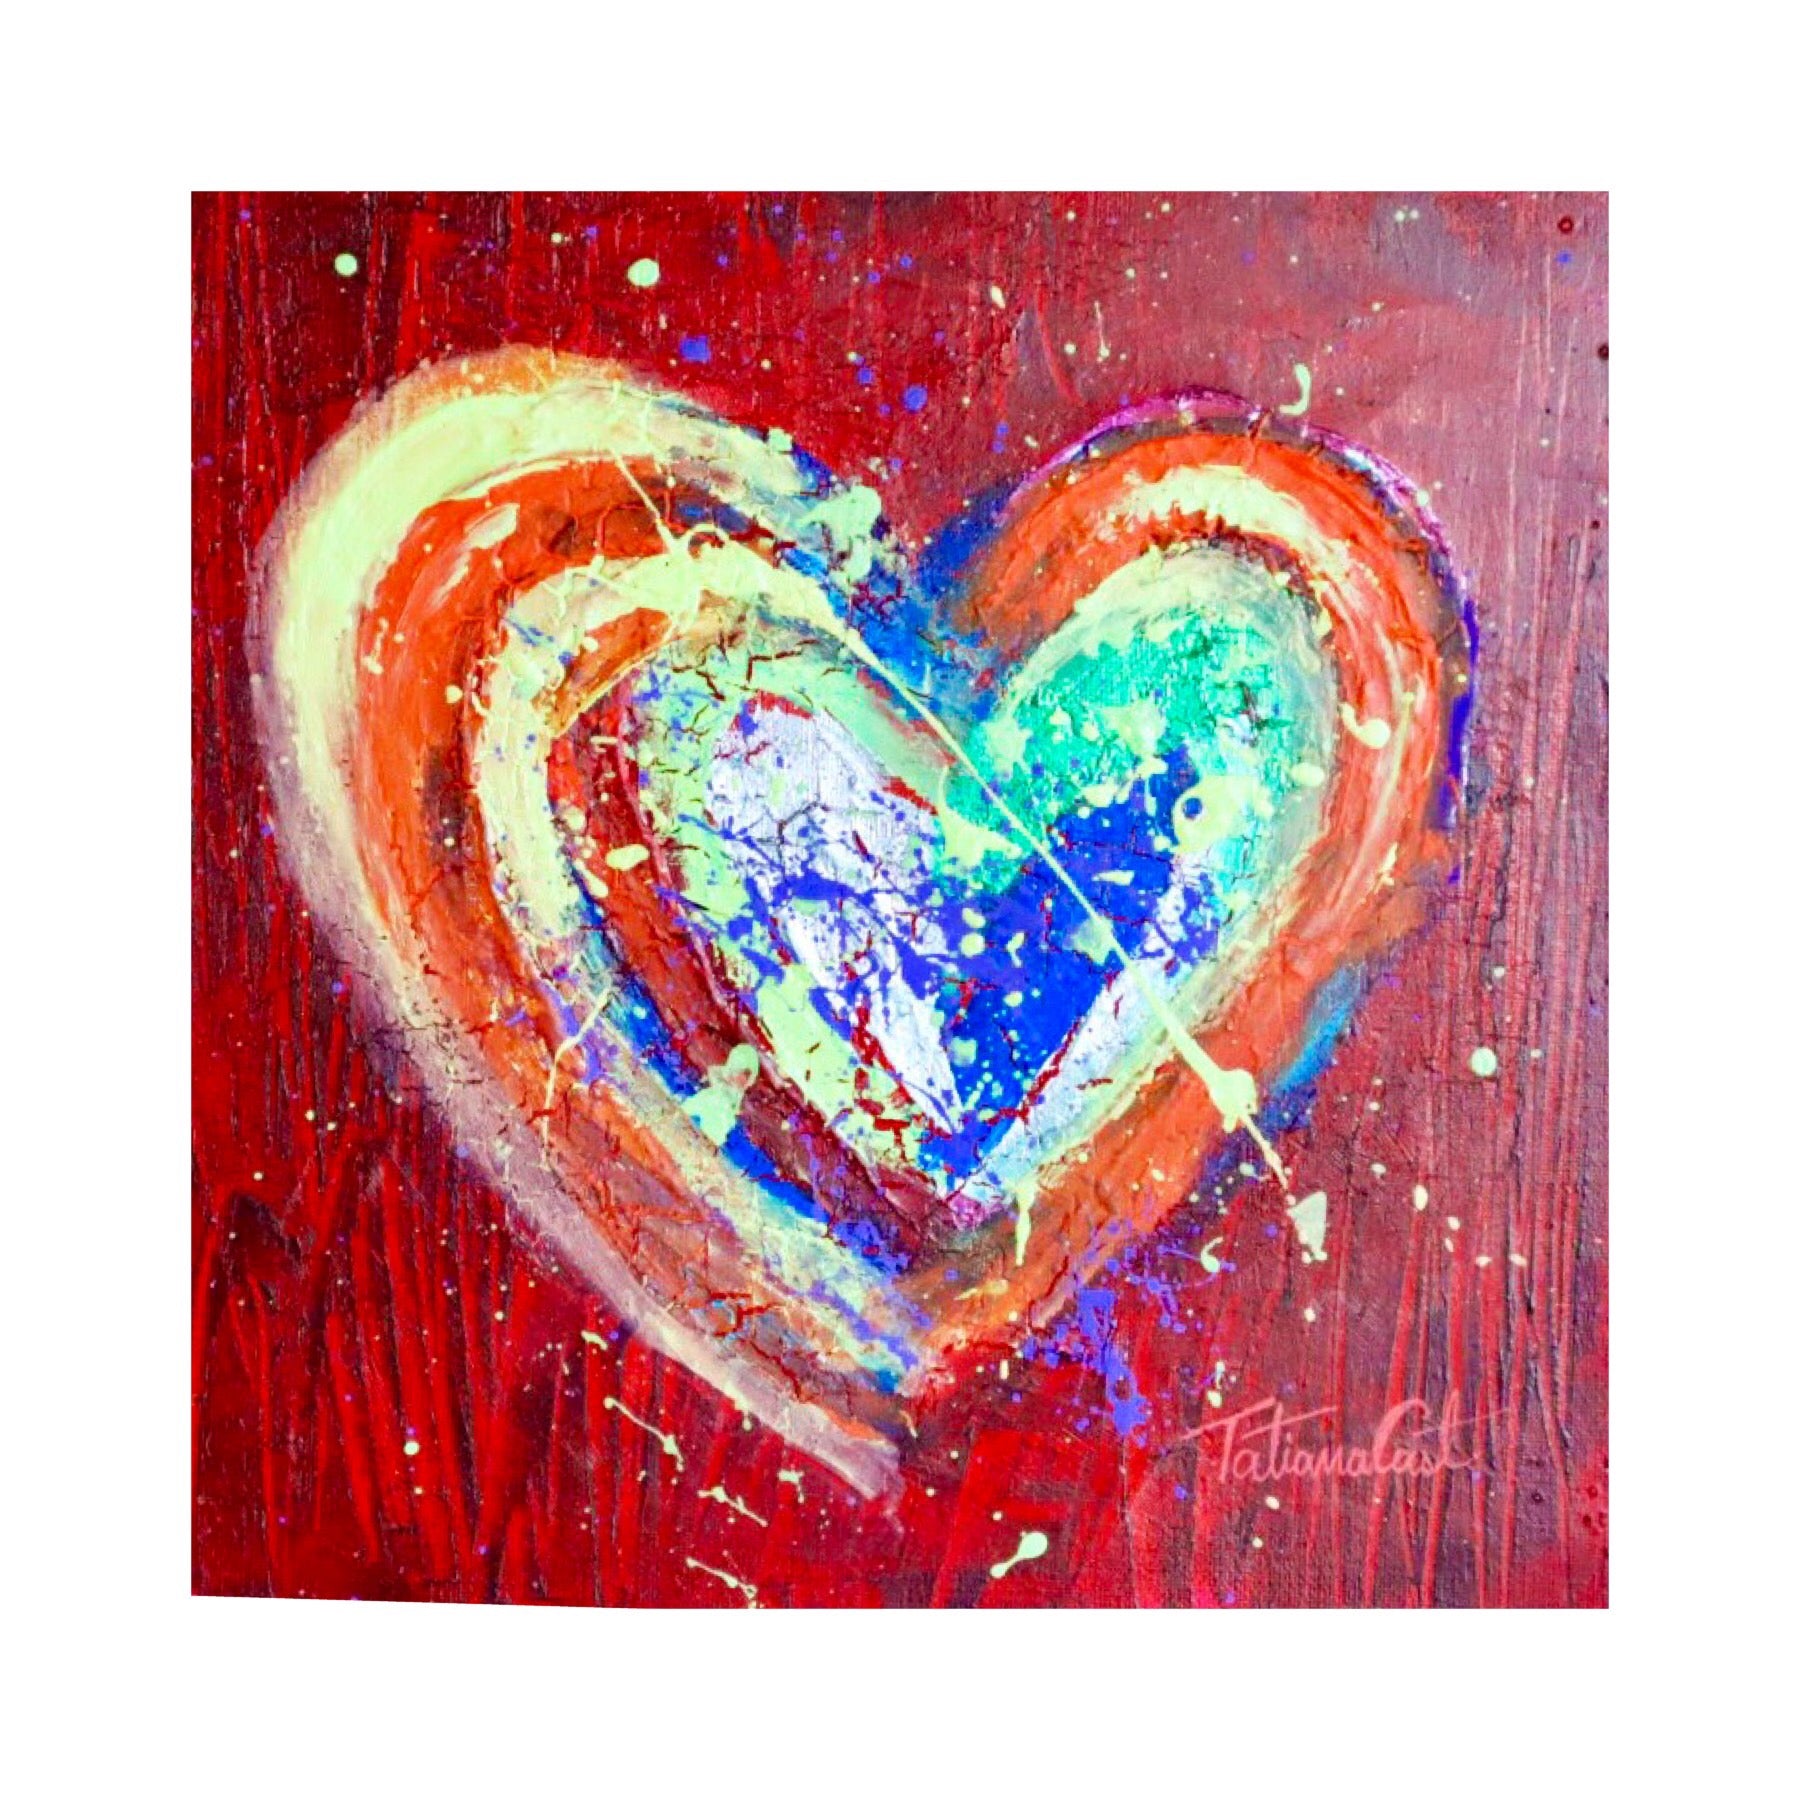 Colorful Heart 4' Original Painting